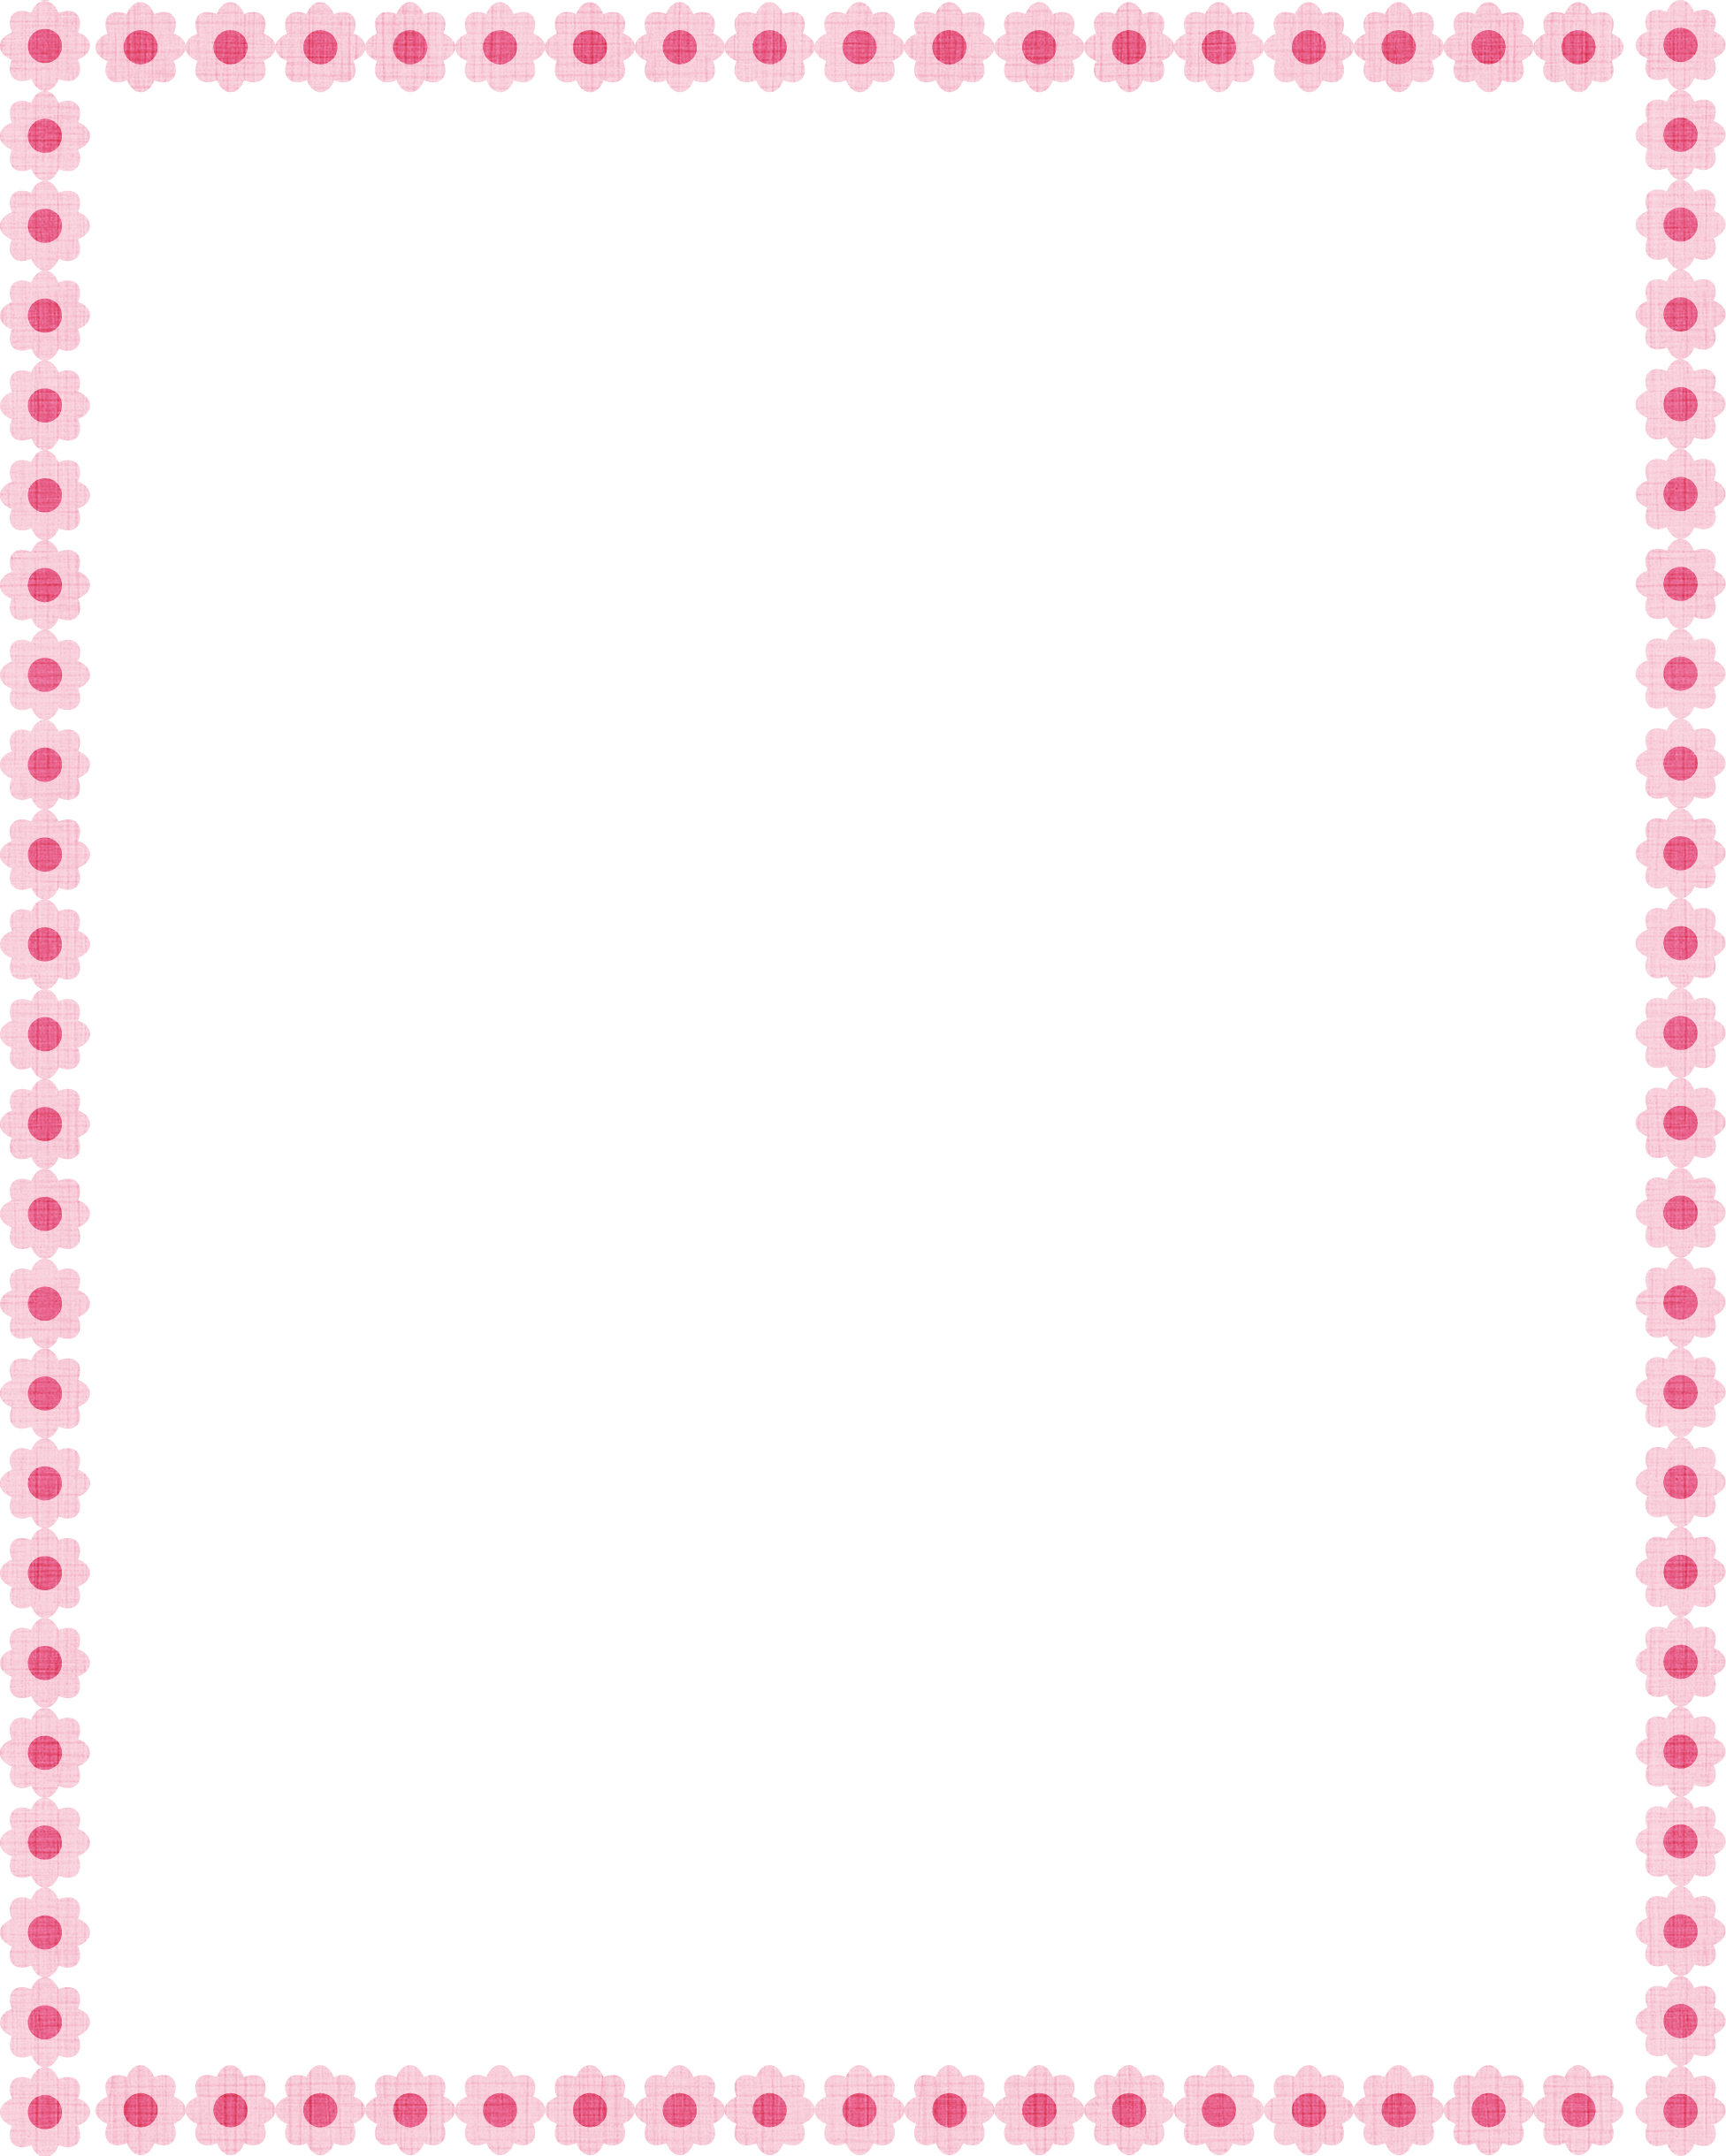 Flower Border - Simple Red Page Border (1952x2439)